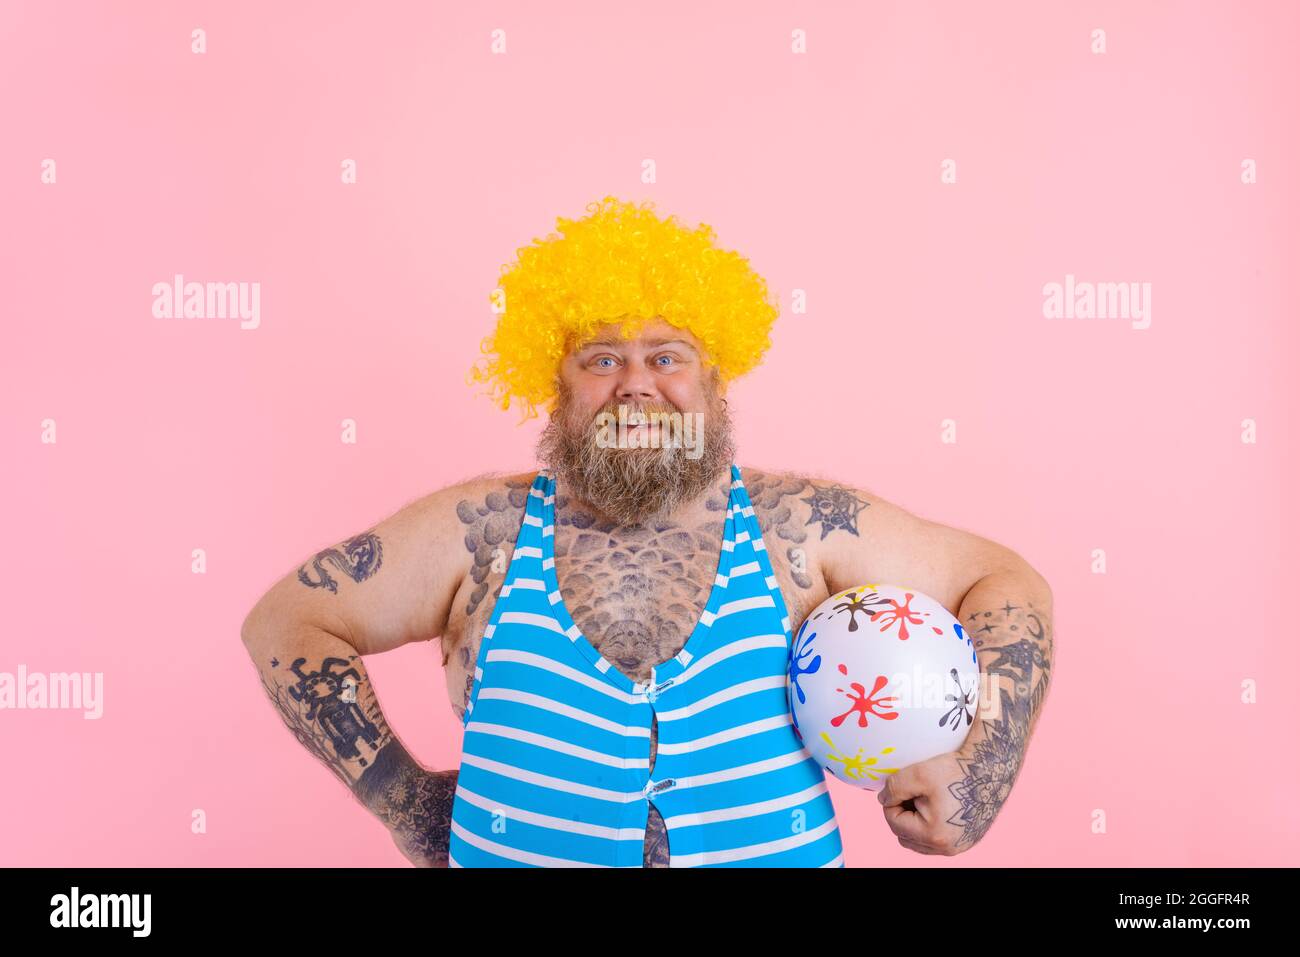 Fat happy man with beard and wig play with the ball Stock Photo